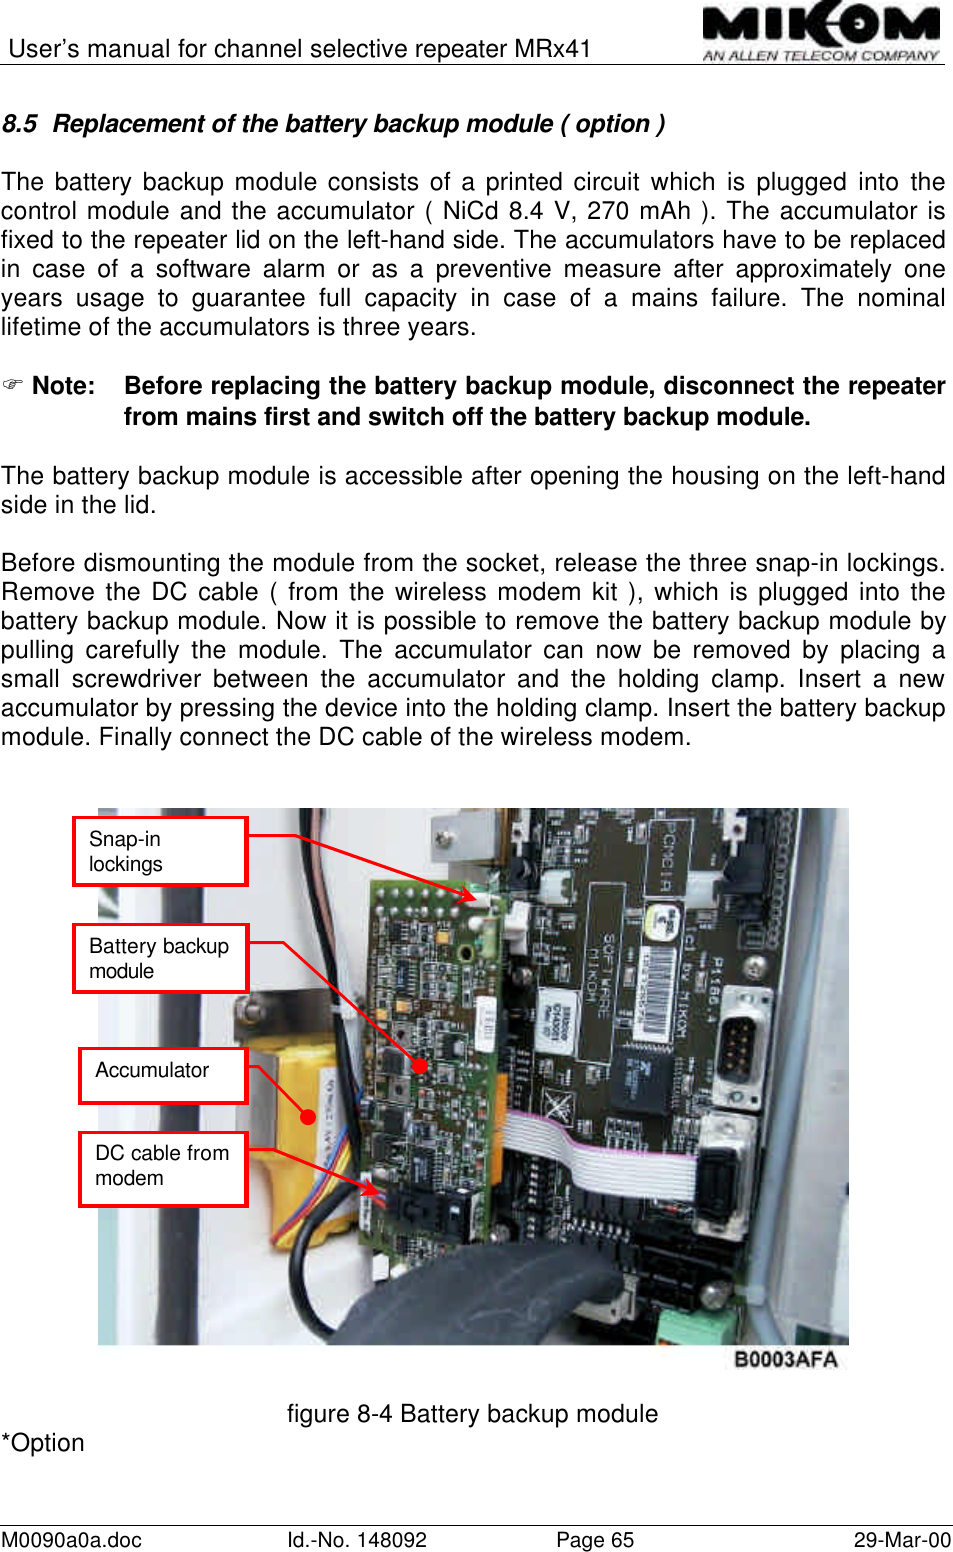 User’s manual for channel selective repeater MRx41M0090a0a.doc Id.-No. 148092 Page 65 29-Mar-008.5 Replacement of the battery backup module ( option )The battery backup module consists of a printed circuit which is plugged into thecontrol module and the accumulator ( NiCd 8.4 V, 270 mAh ). The accumulator isfixed to the repeater lid on the left-hand side. The accumulators have to be replacedin case of a software alarm or as a preventive measure after approximately oneyears usage to guarantee full capacity in case of a mains failure. The nominallifetime of the accumulators is three years.F Note: Before replacing the battery backup module, disconnect the repeaterfrom mains first and switch off the battery backup module.The battery backup module is accessible after opening the housing on the left-handside in the lid.Before dismounting the module from the socket, release the three snap-in lockings.Remove the DC cable ( from the wireless modem kit ), which is plugged into thebattery backup module. Now it is possible to remove the battery backup module bypulling carefully the module. The accumulator can now be removed by placing asmall screwdriver between the accumulator and the holding clamp. Insert a newaccumulator by pressing the device into the holding clamp. Insert the battery backupmodule. Finally connect the DC cable of the wireless modem.figure 8-4 Battery backup module*OptionSnap-inlockingsAccumulatorBattery backupmoduleDC cable frommodem